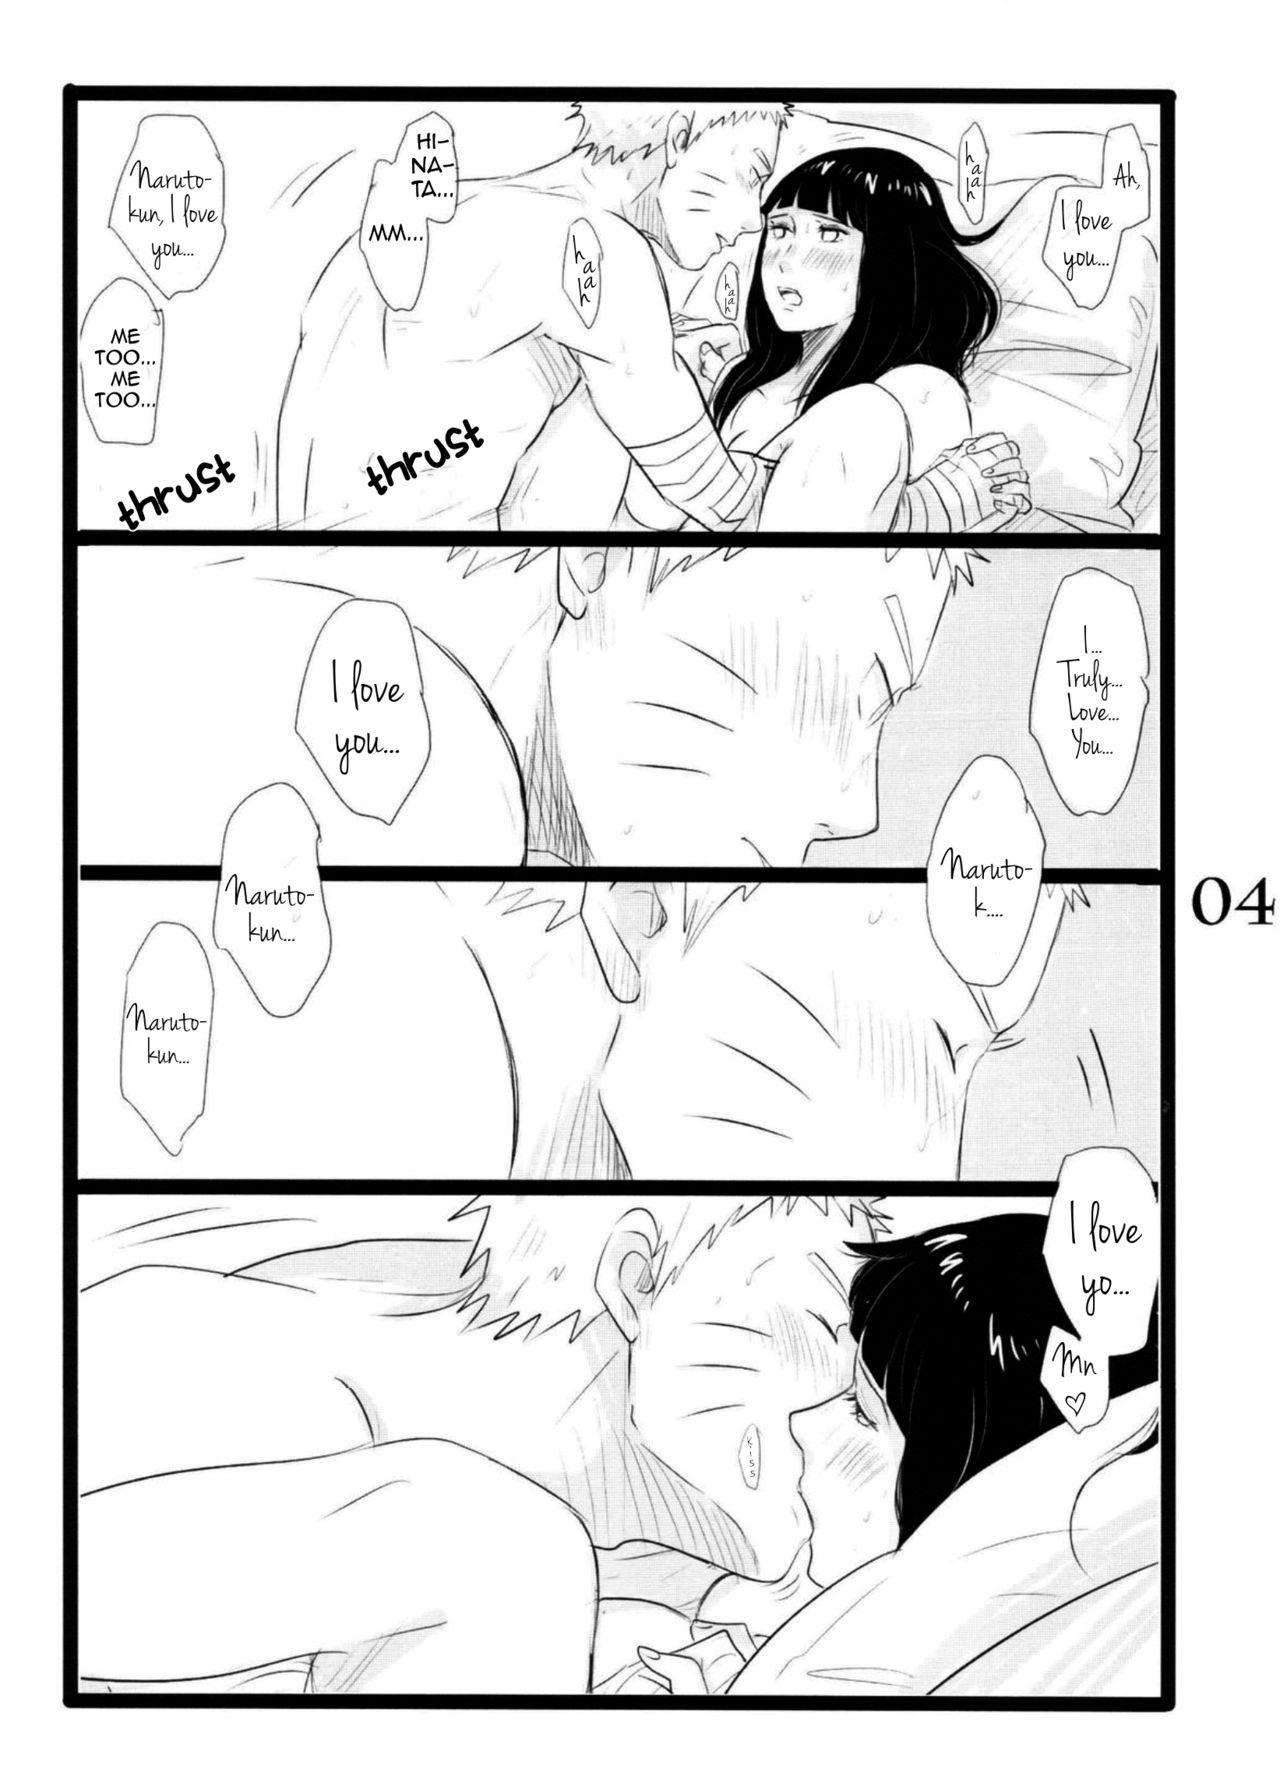 Punishment YOUR MY SWEET - I LOVE YOU DARLING - Naruto Jockstrap - Page 5